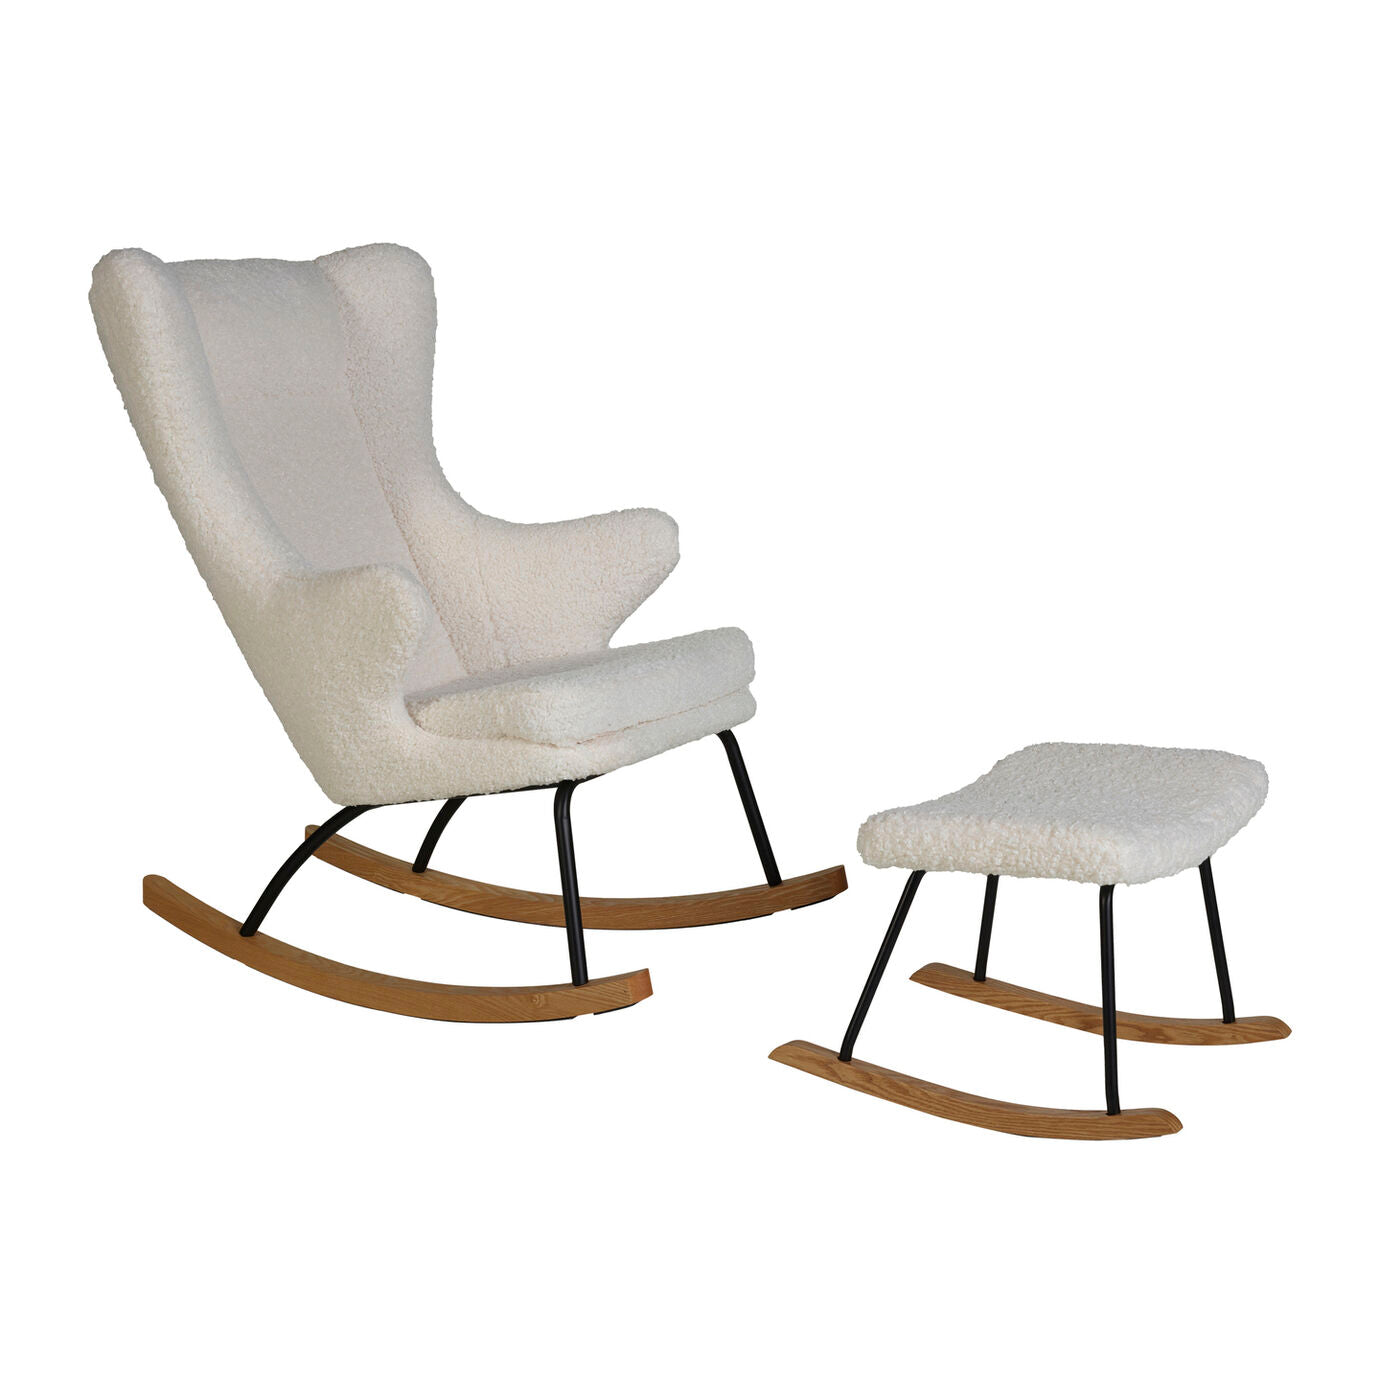 Quax- Rocking Adult Chair De Luxe- Limited Edition